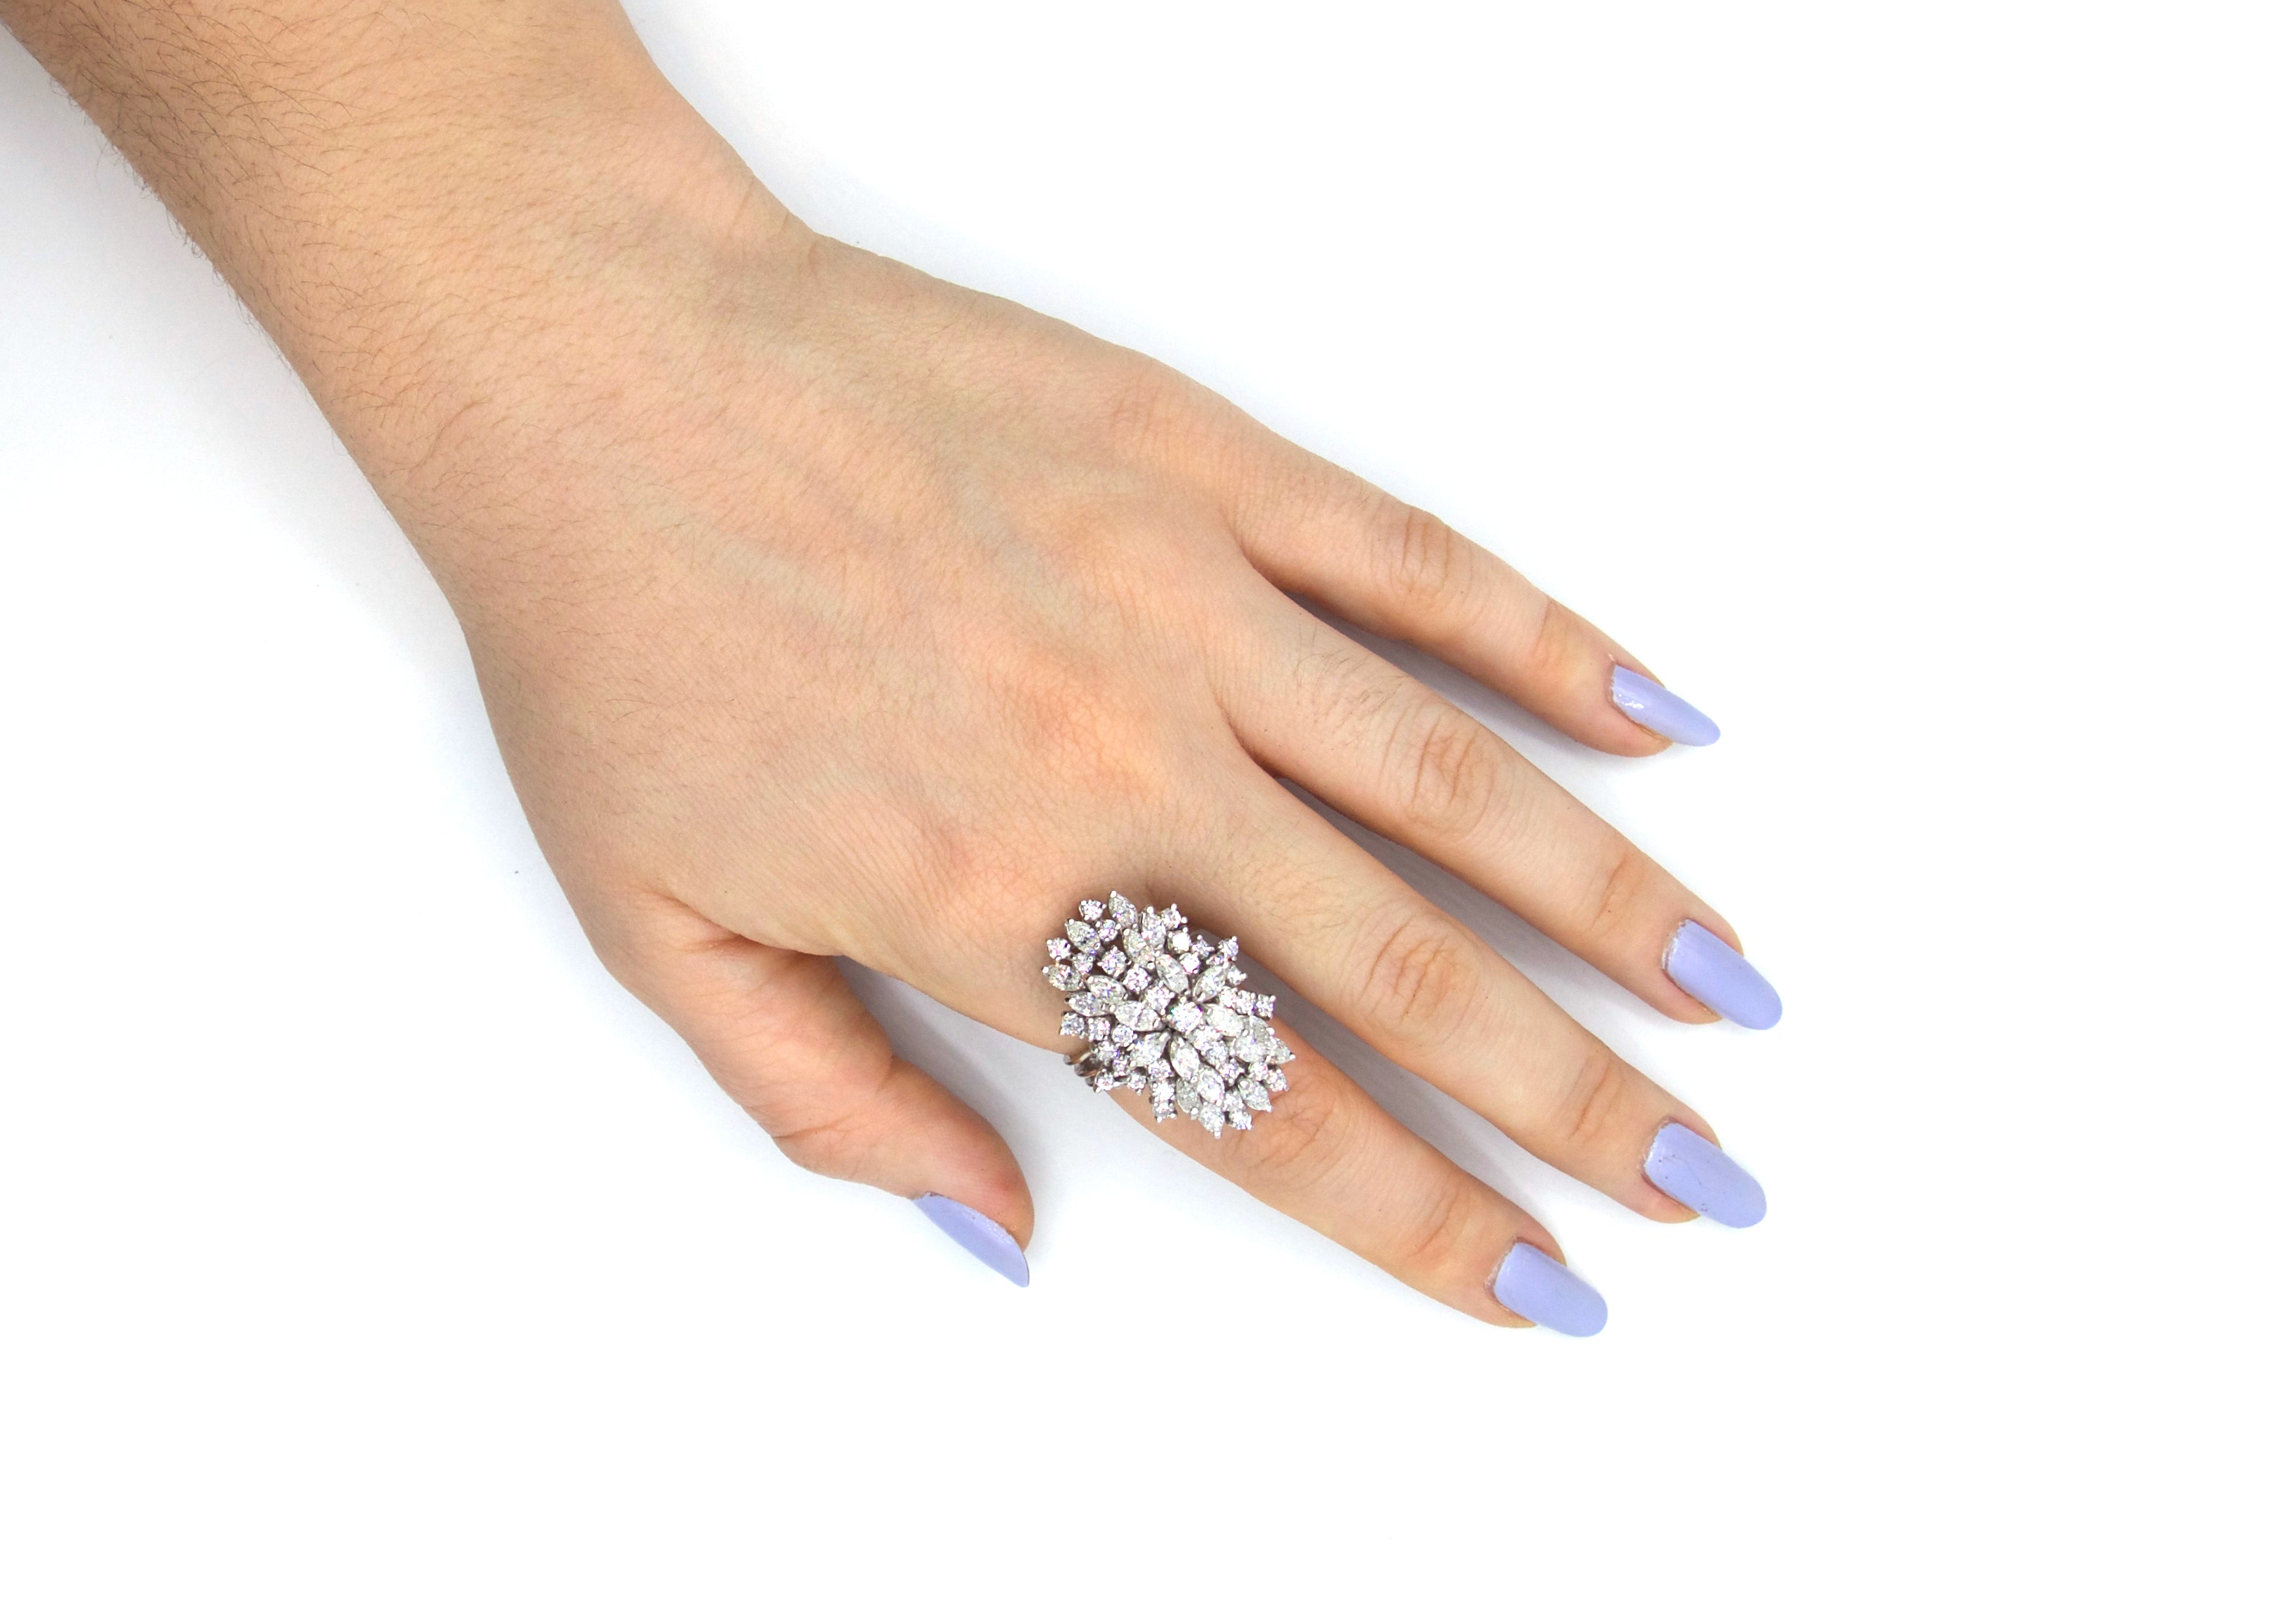 Retro Oval Shaped Diamond Cluster White Gold Ring